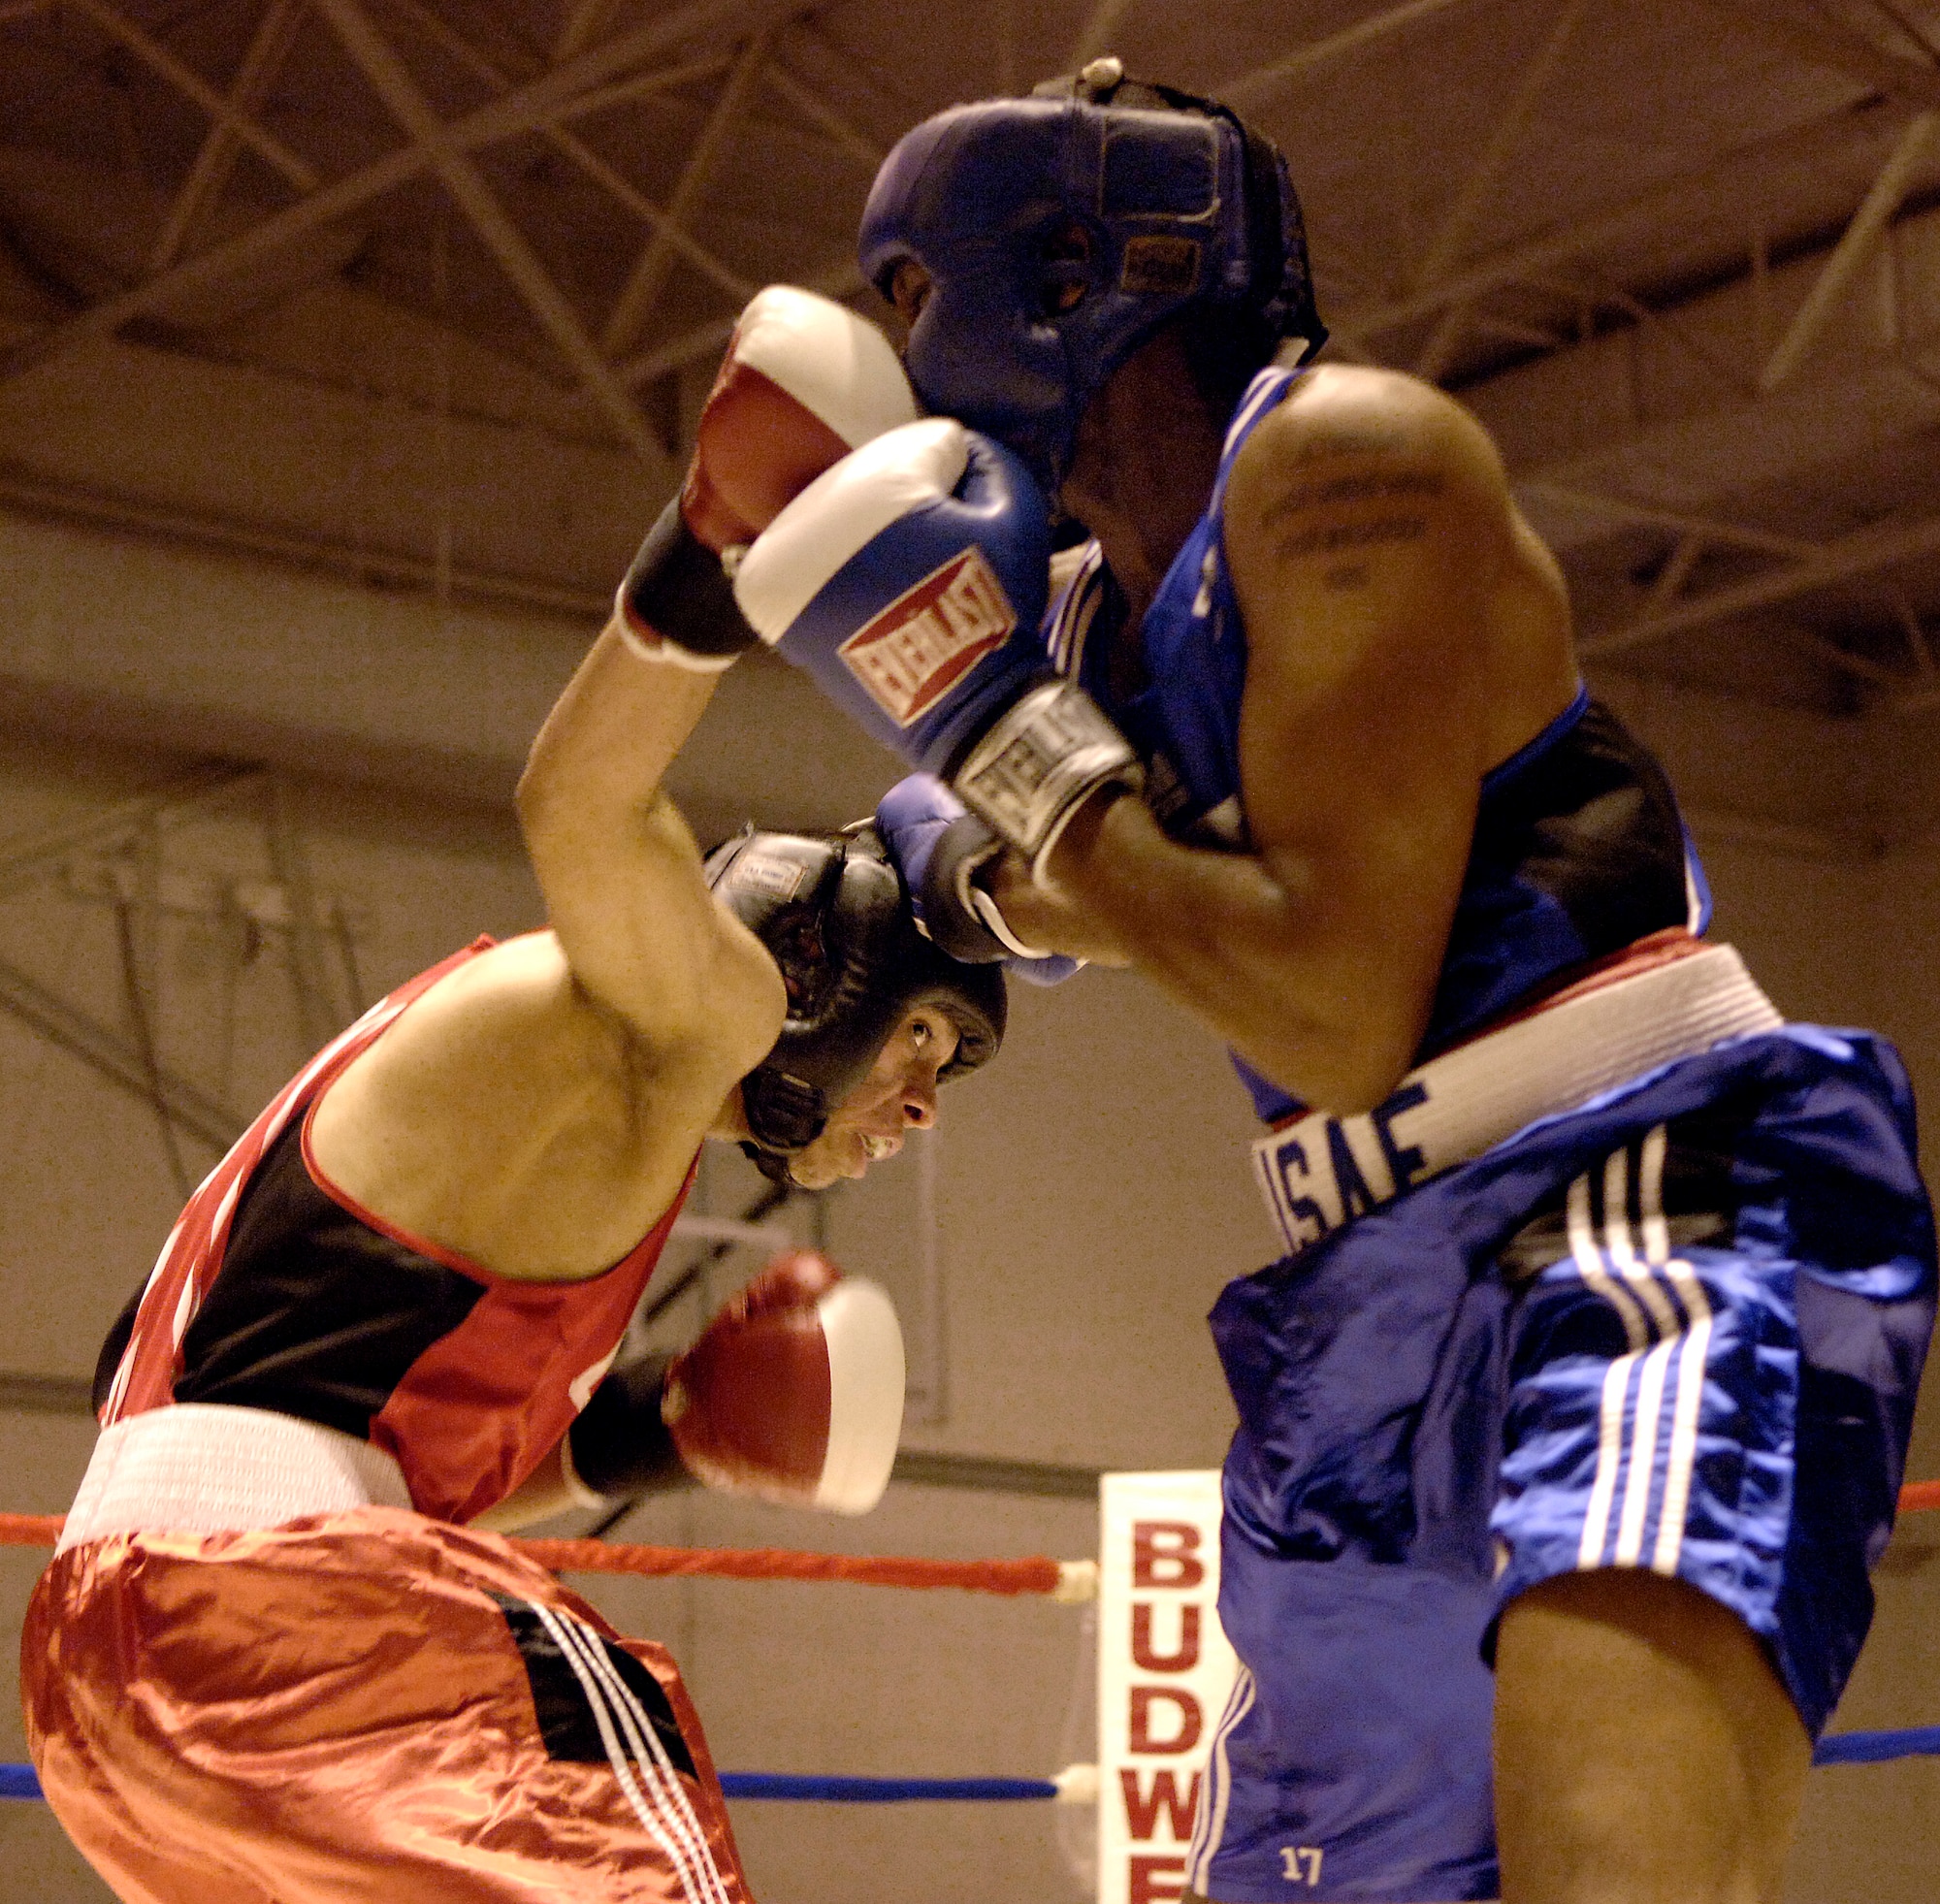 SAN ANTONIO (AFPN) -- Hector Ramos connects with an over-the-top hook to Kevin Leggett in the second round of their match Jan. 20. Ramos is from Travis Air Force Base, Calif., and Leggett is from Homestead Air Reserve Base, Fla. Ramos will represent the Air Force at the Armed Forces Boxing Tournament at Fort Huachuca, Ariz., Feb. 6 to 11. (U.S. Air Force photo by Tech. Sgt. Larry A. Simmons)